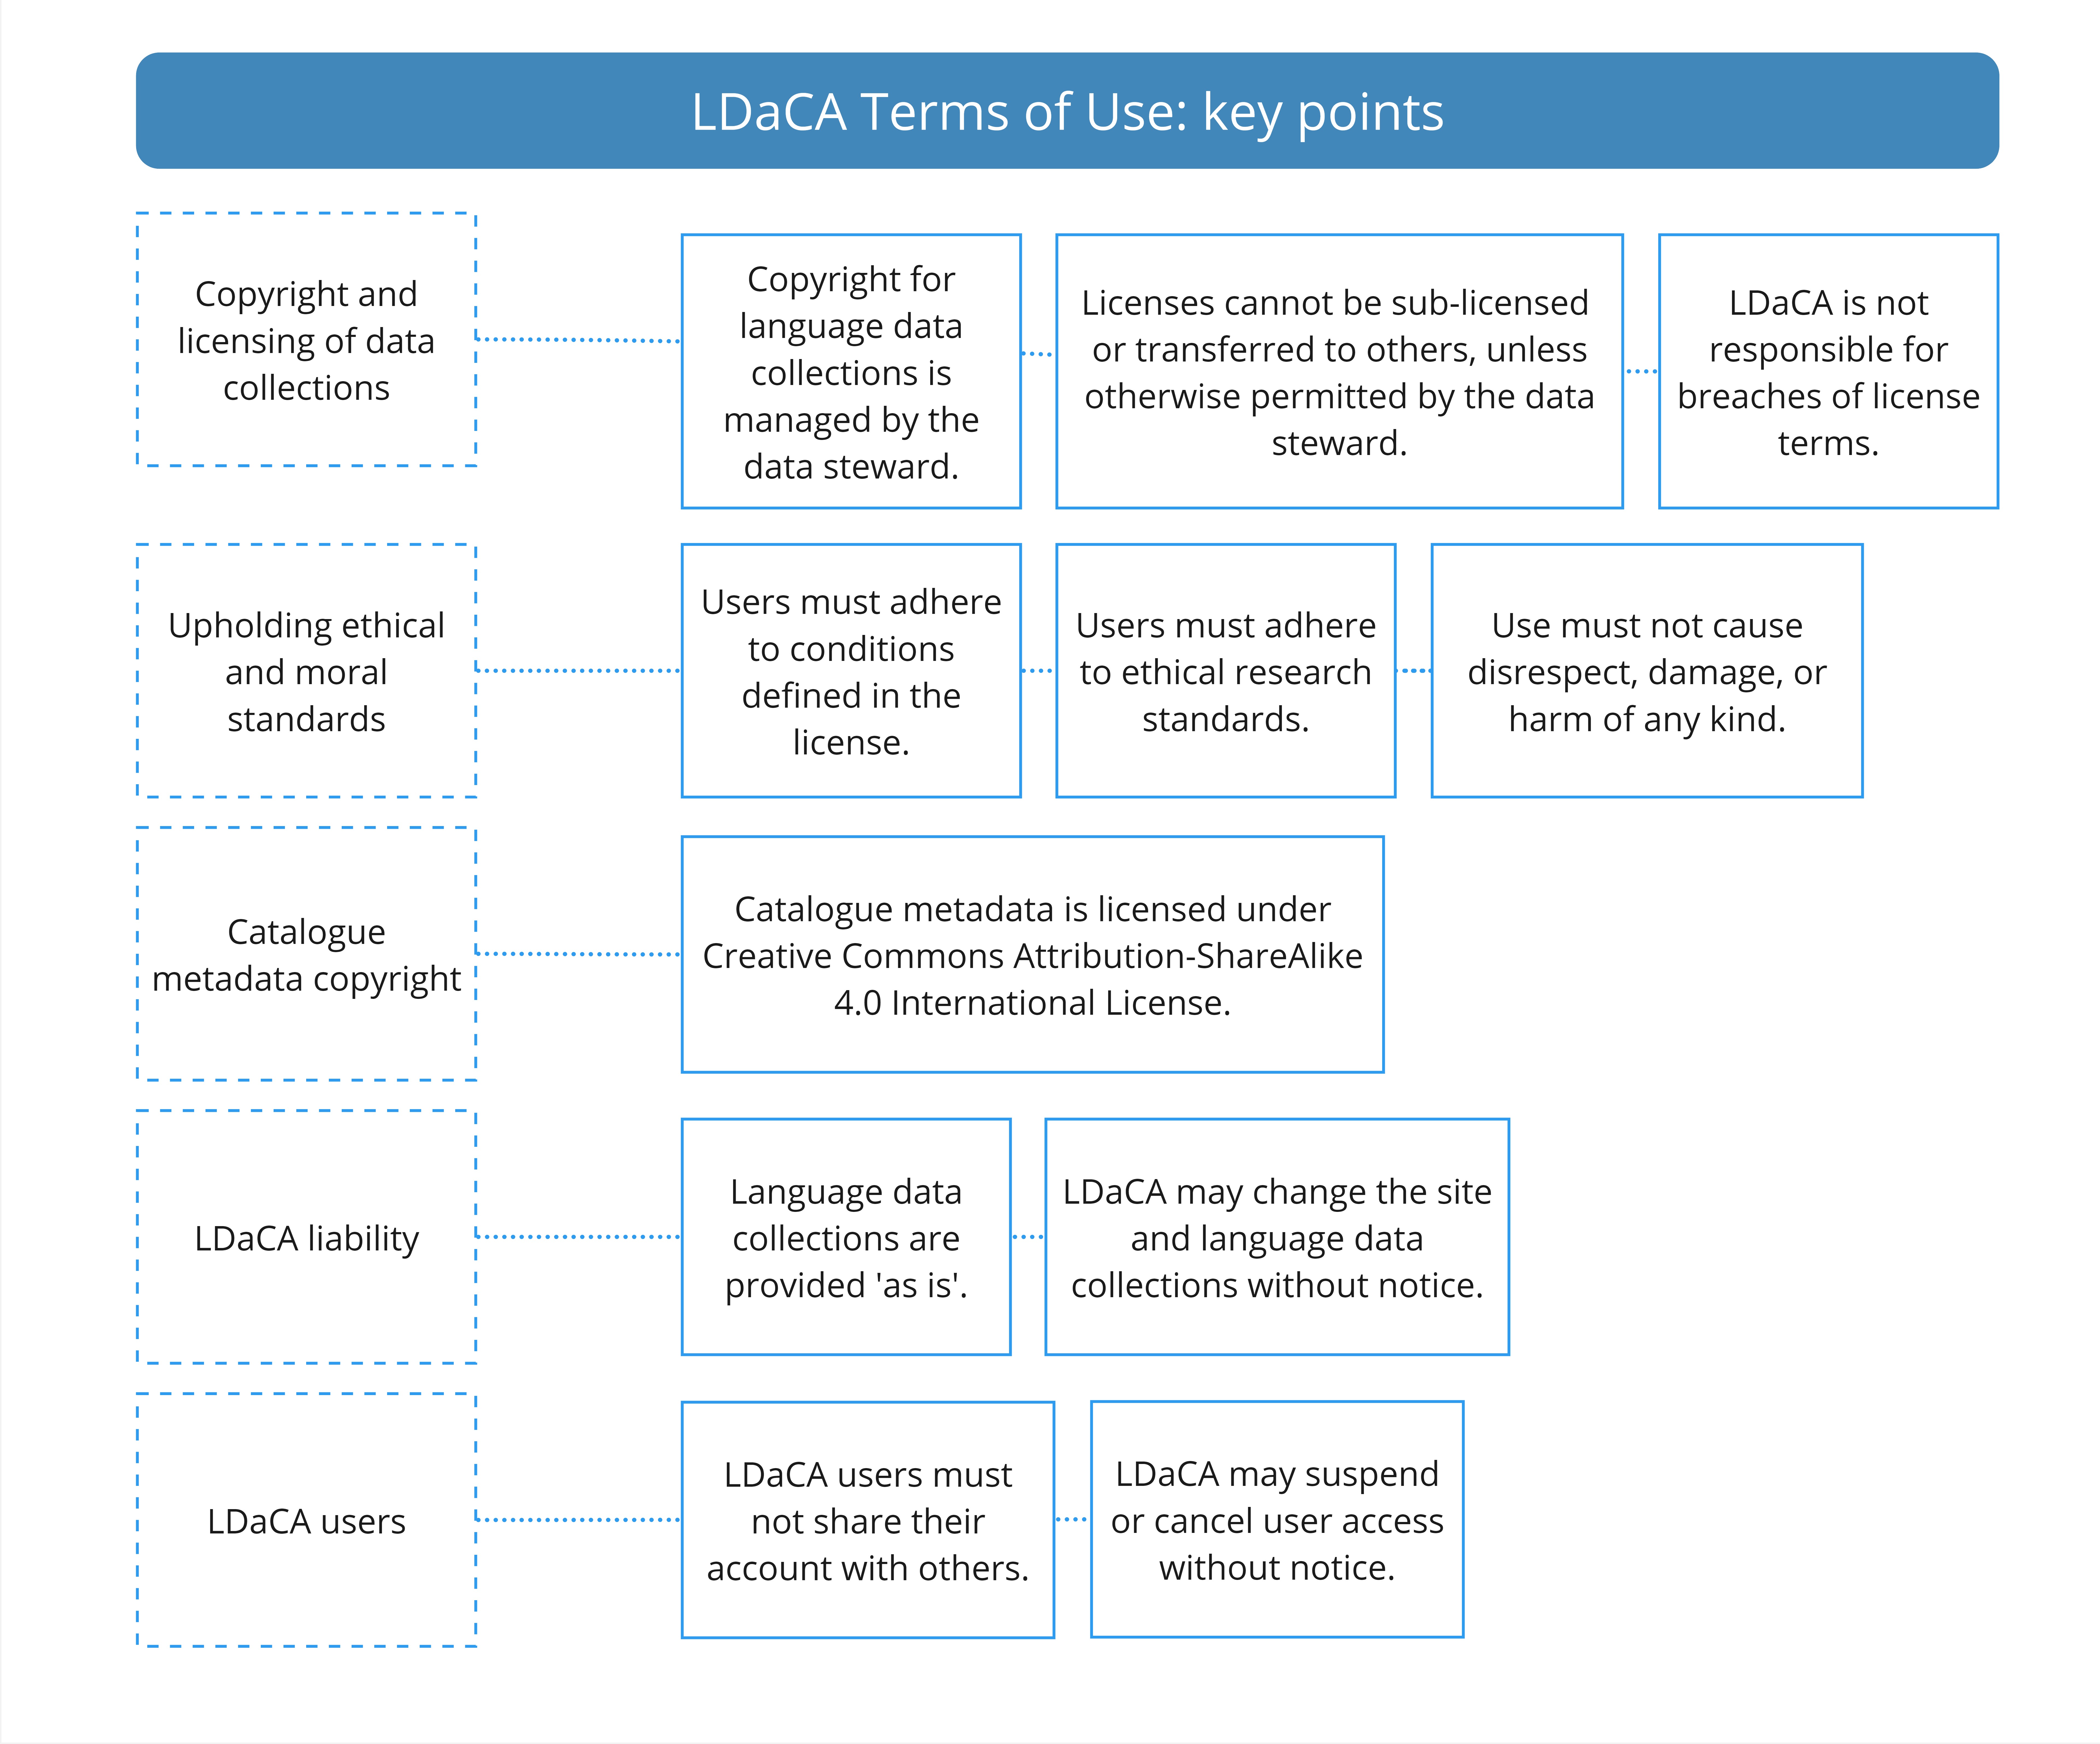 LDaCA Terms of Use: Key Points